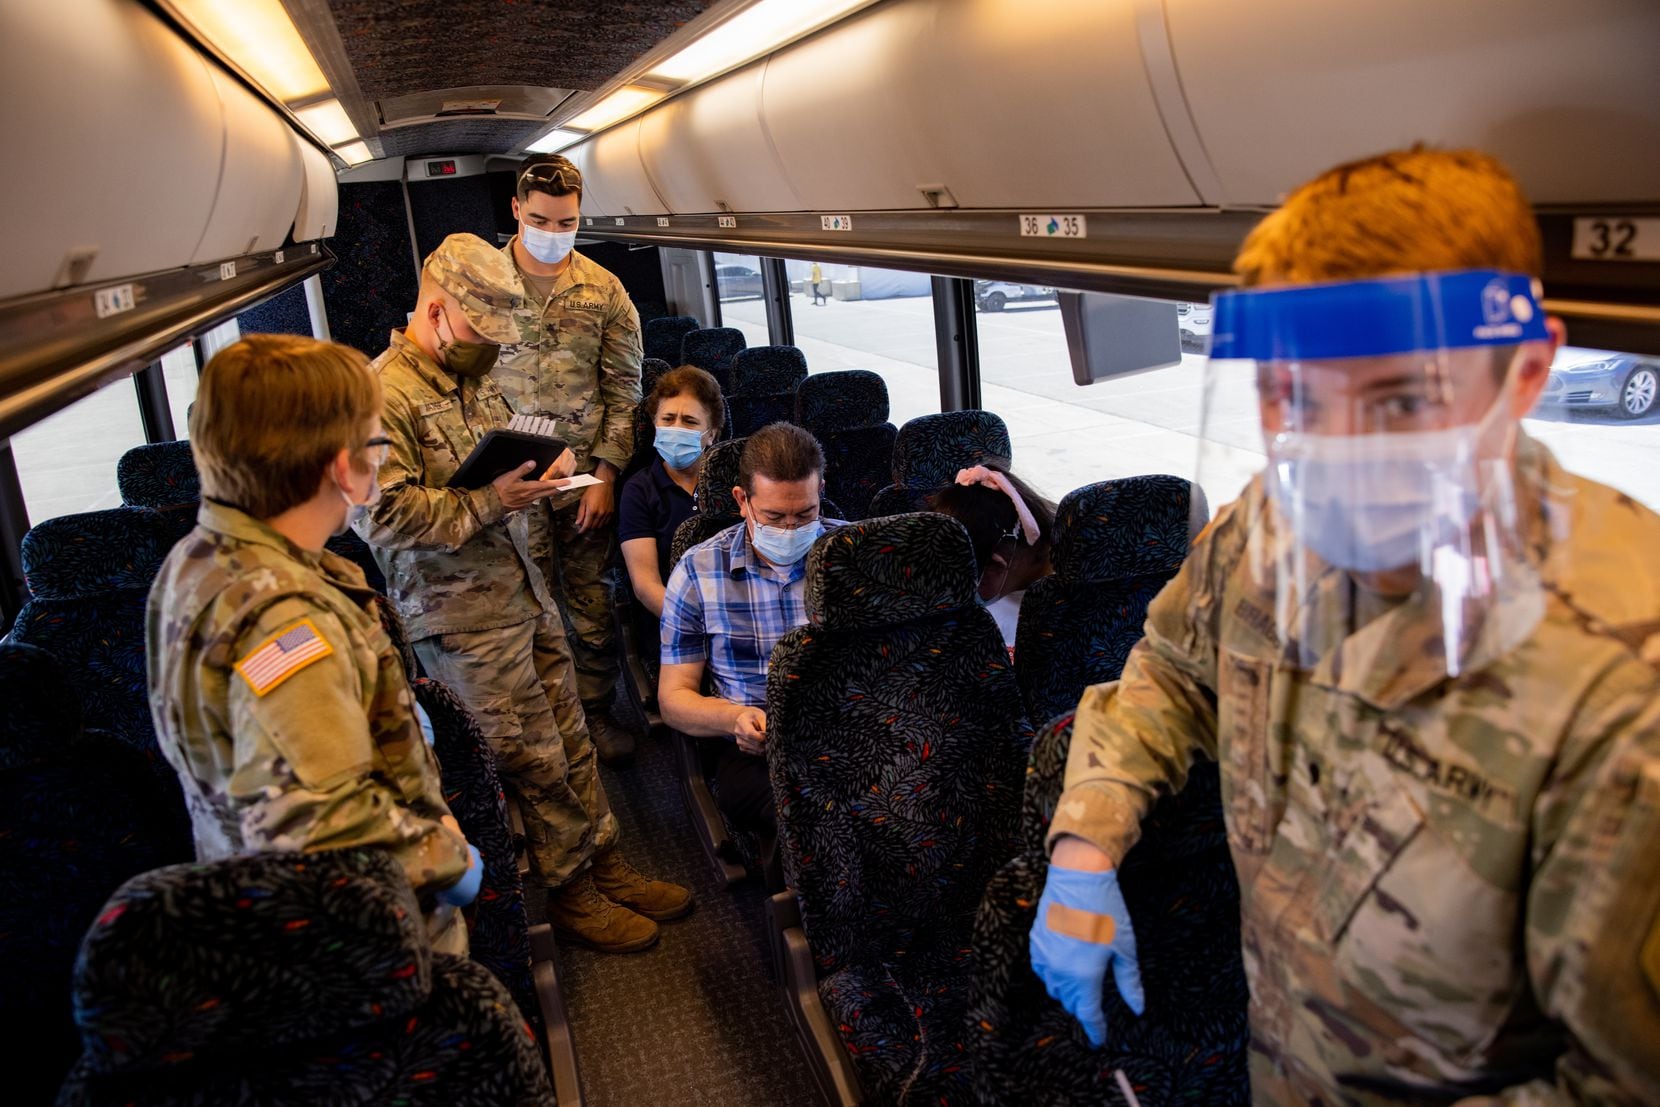 U.S. Army troops prepare to administer the COVID-19 vaccine at Fair Park through the "Registration and Transportation" effort by Dallas County that bused people from Bachman Recreation Center.